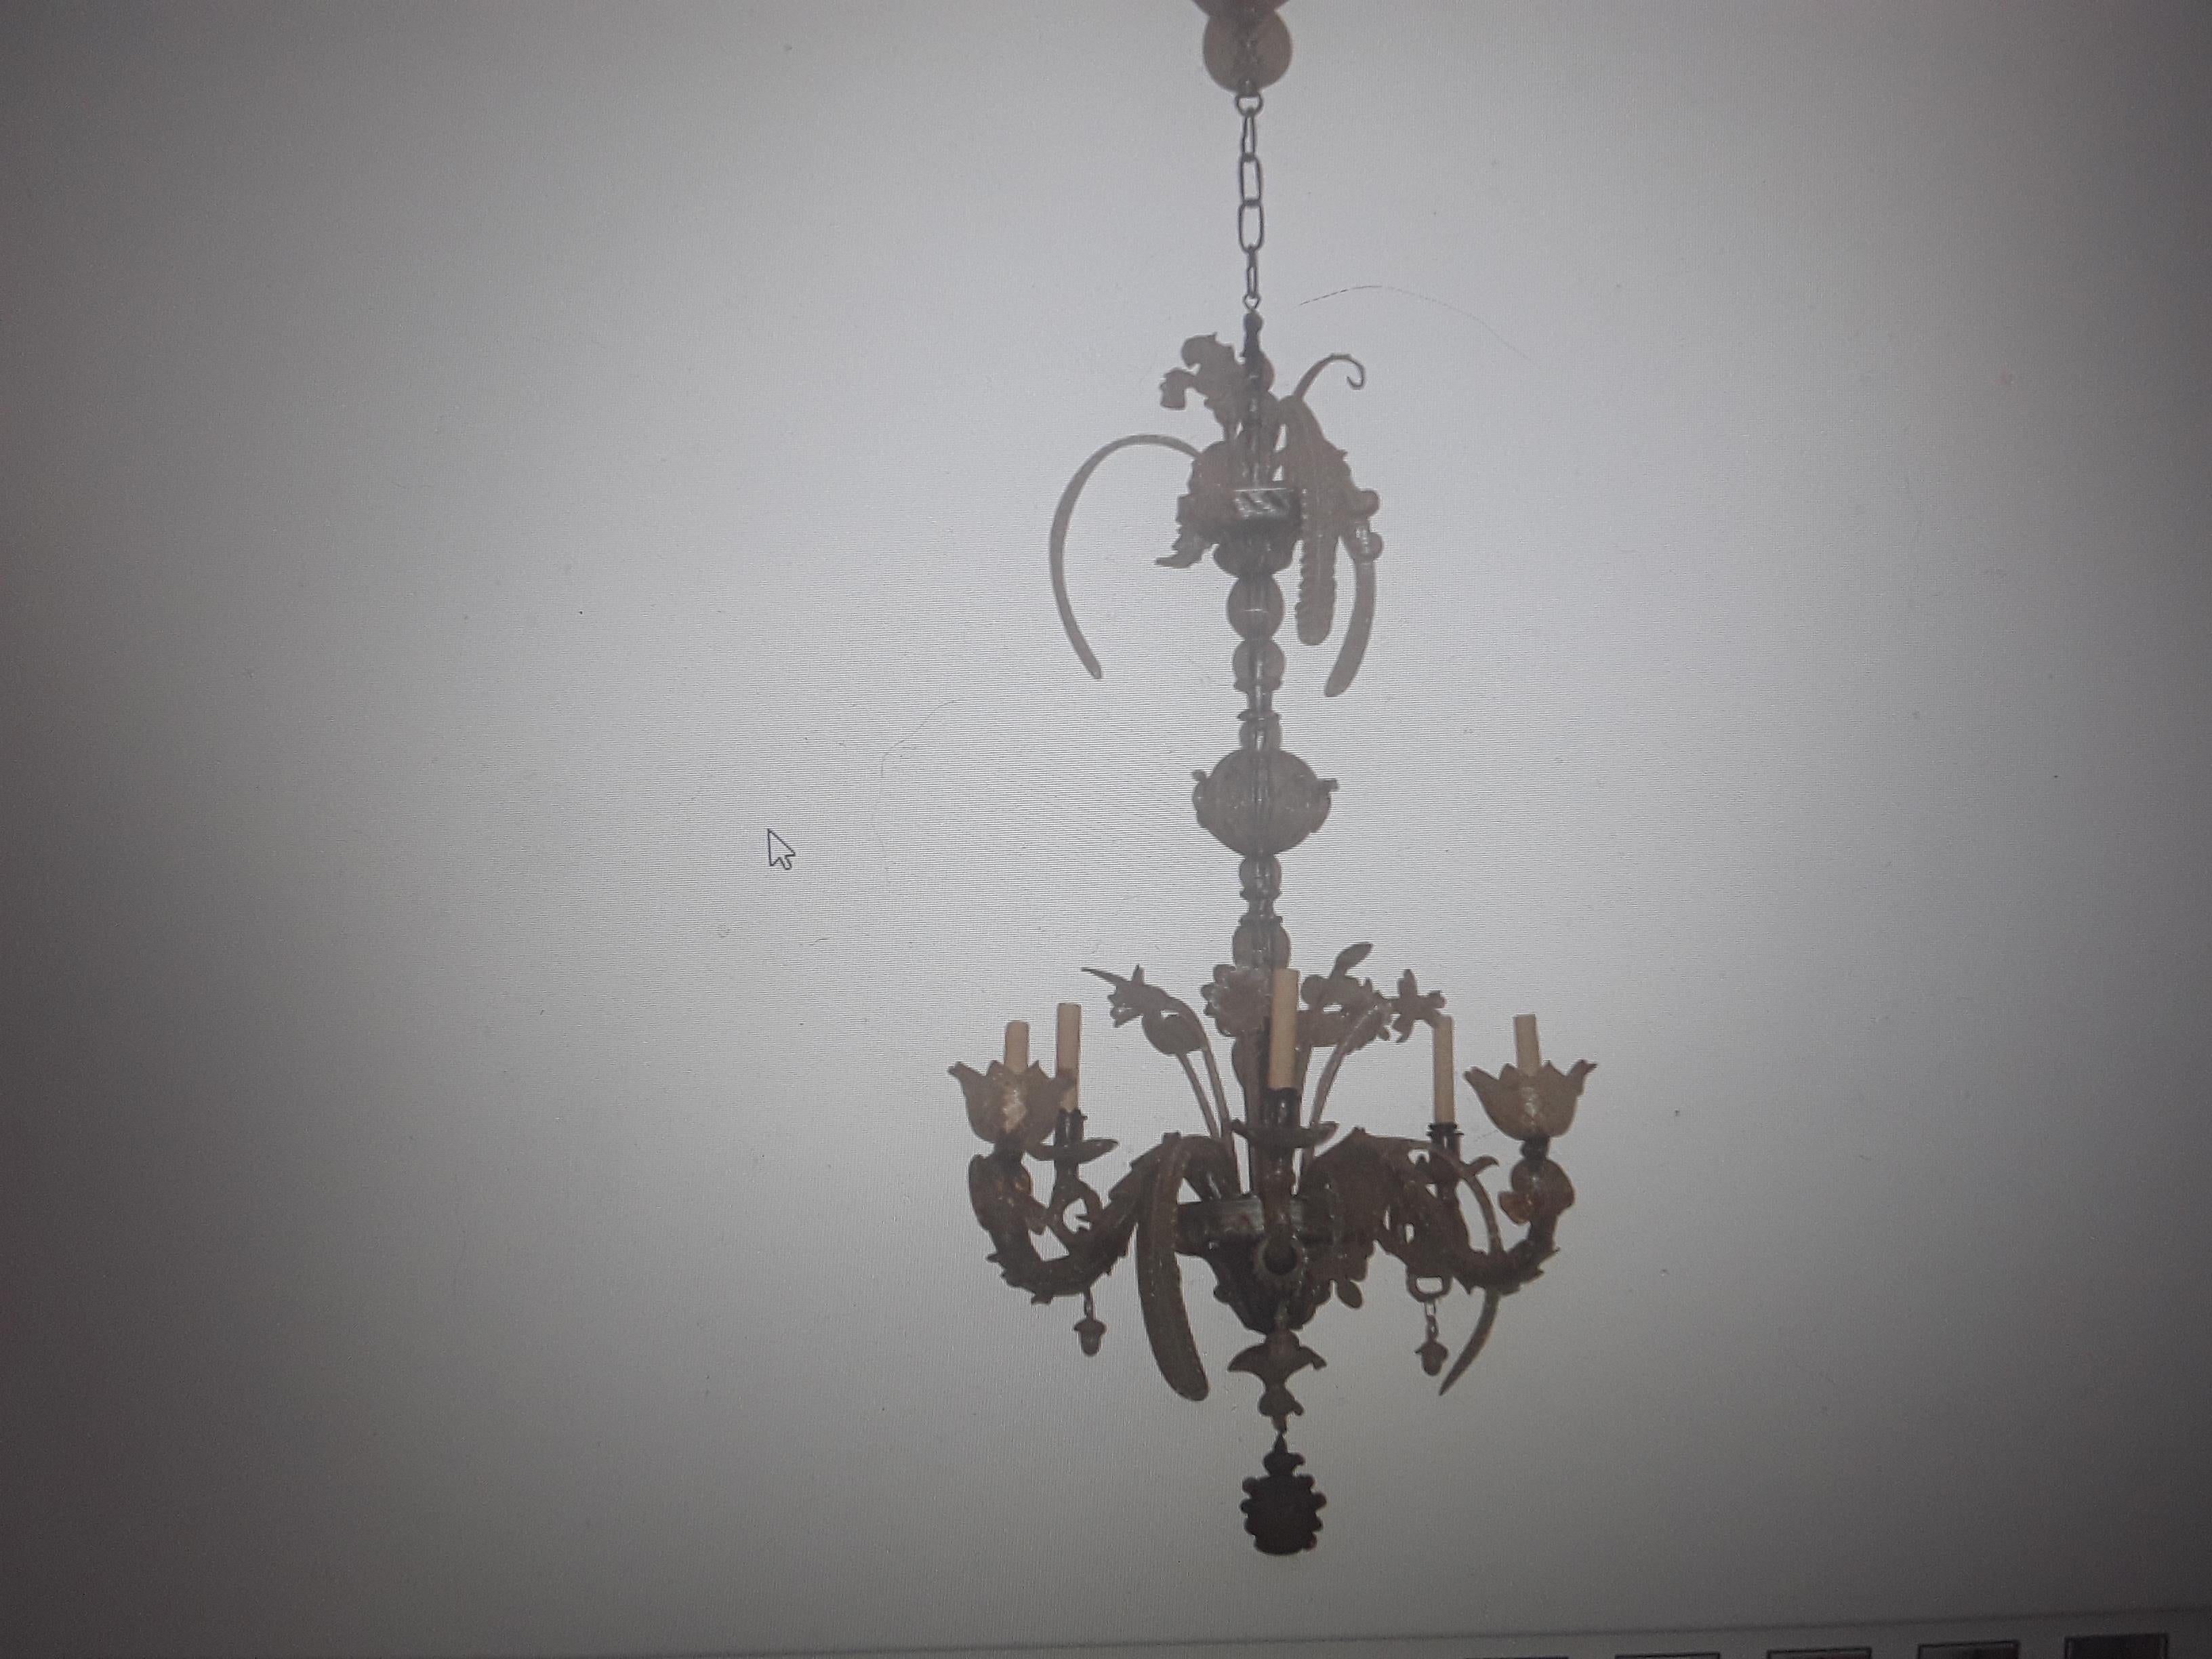 Unusual and Beautiful 1920's Italian Art Deco Murano attrib. Barovier&Toso Art Glass Chandelier. Featuring full relief art glass fish/ dolphin/ sea creatures. Art glass floral detail. This piece has been restored. Highly detailed.